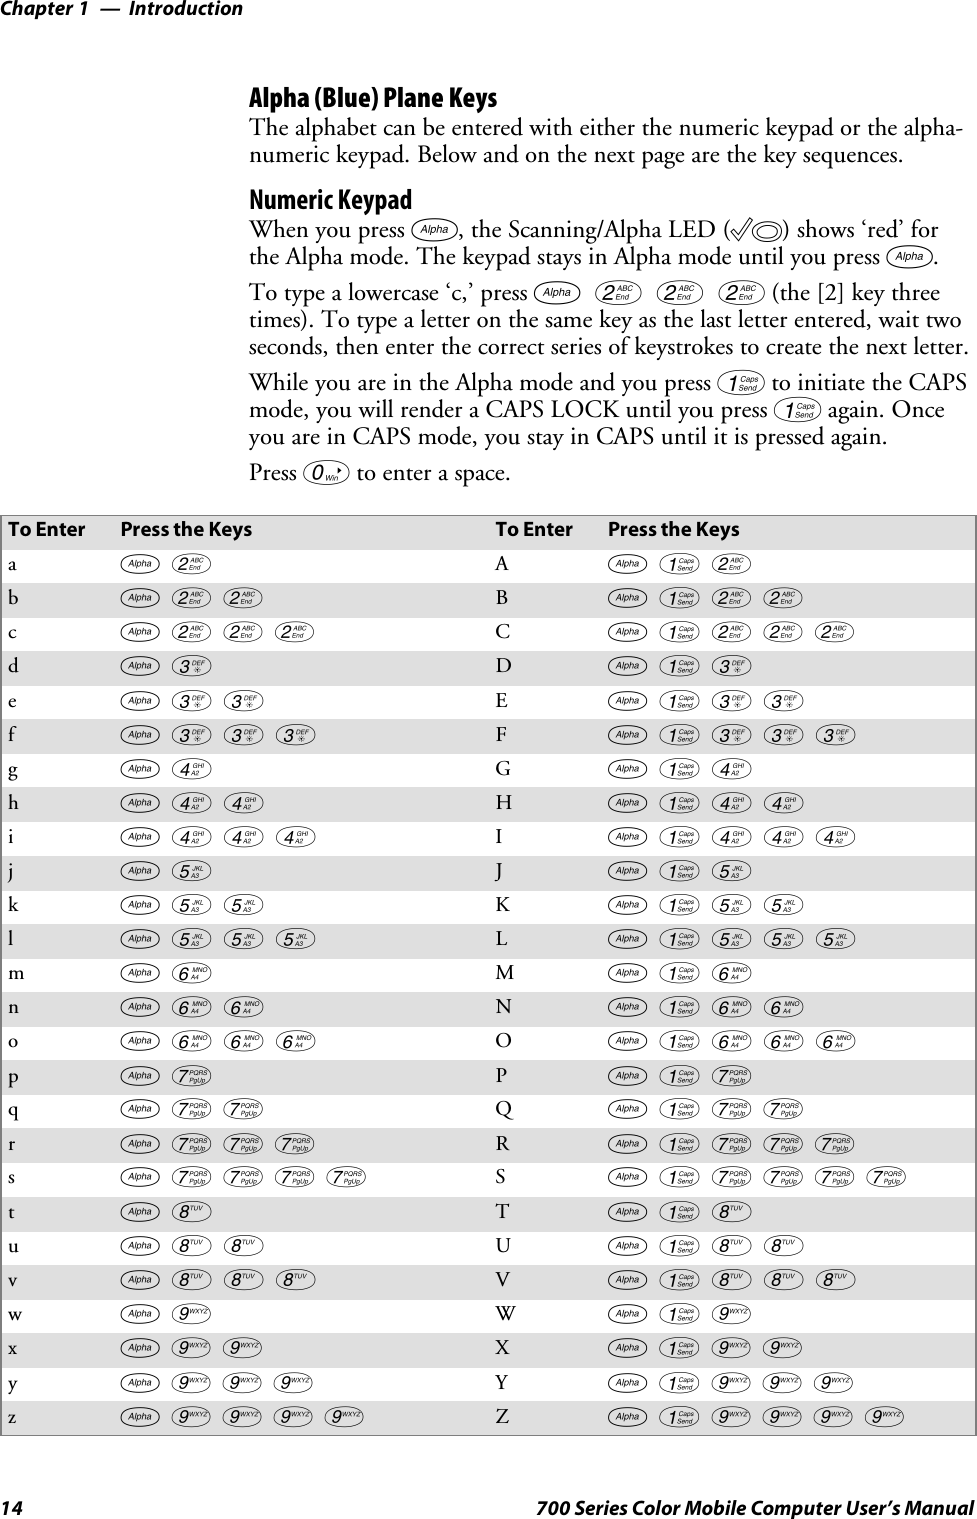 IntroductionChapter —114 700 Series Color Mobile Computer User’s ManualAlpha (Blue) Plane KeysThe alphabet can be entered with either the numeric keypad or the alpha-numeric keypad. Below and on the next page are the key sequences.Numeric KeypadWhen you press F, the Scanning/Alpha LED (C)shows‘red’forthe Alpha mode. The keypad stays in Alpha mode until you press F.To type a lowercase ‘c,’ press F222(the [2] key threetimes). To type a letter on the same key as the last letter entered, wait twoseconds, then enter the correct series of keystrokes to create the next letter.WhileyouareintheAlphamodeandyoupress1to initiate the CAPSmode, you will render a CAPS LOCK until you press 1again. Onceyou are in CAPS mode, you stay in CAPS until it is pressed again.Press 0to enter a space.To Enter Press the Keys To Enter Press the KeysaF2 AF12bF22 BF122cF222 CF1222dF3 DF13eF33 EF133fF333 FF1333gF4 GF14hF44 HF144iF444 IF1444jF5 JF15kF55 KF155lF555 LF1555mF6 MF16nF66 NF166oF666 OF1666pF7 PF17qF77 QF177rF777 RF1777sF7777 SF17777tF8 TF18uF88 UF188vF888 VF1888wF9 WF19xF99 XF199yF999 YF1999zF9999 ZF19999